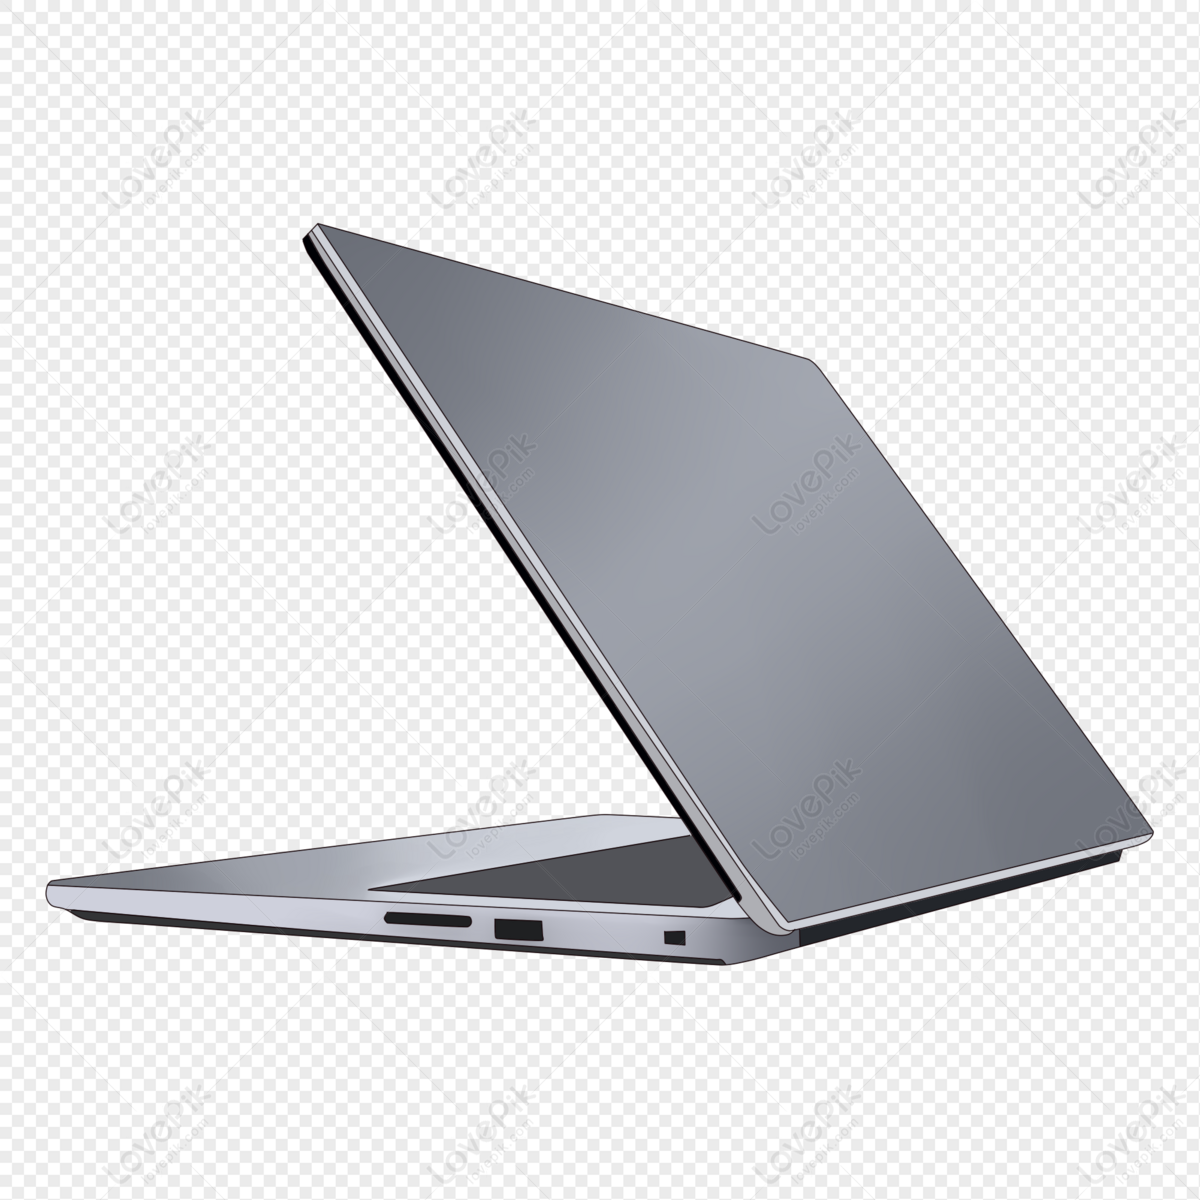 Laptop PNG Transparent Background And Clipart Image For Free Download -  Lovepik | 401353980